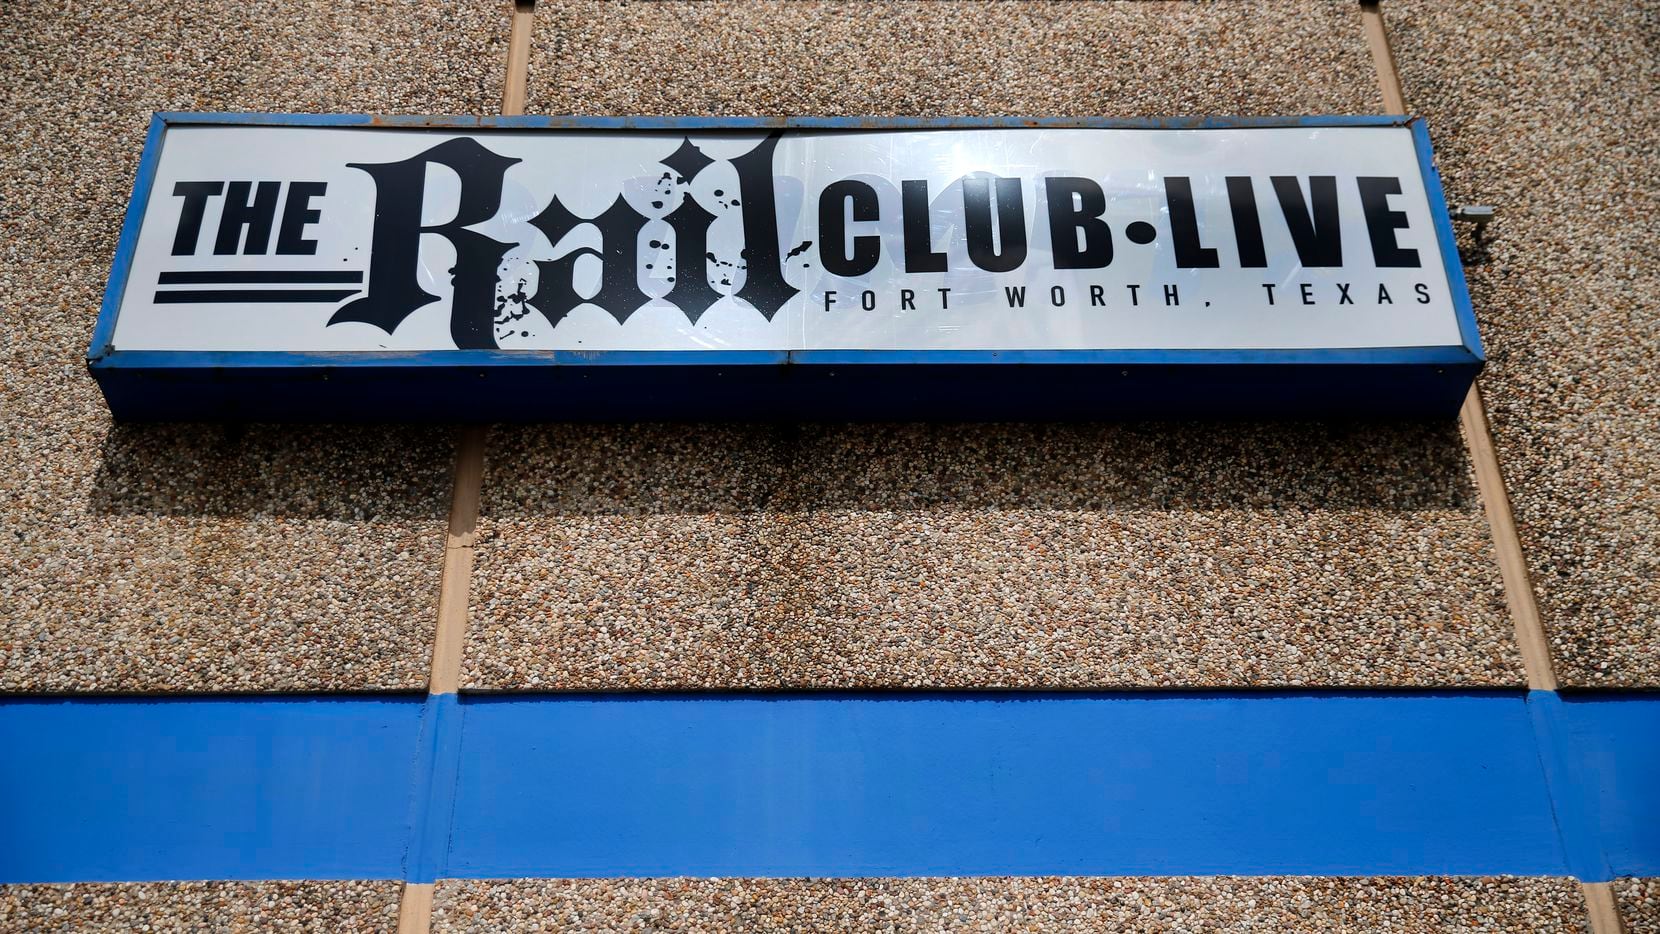 The Rail Club Live is a bar and metal music venue in Fort Worth.